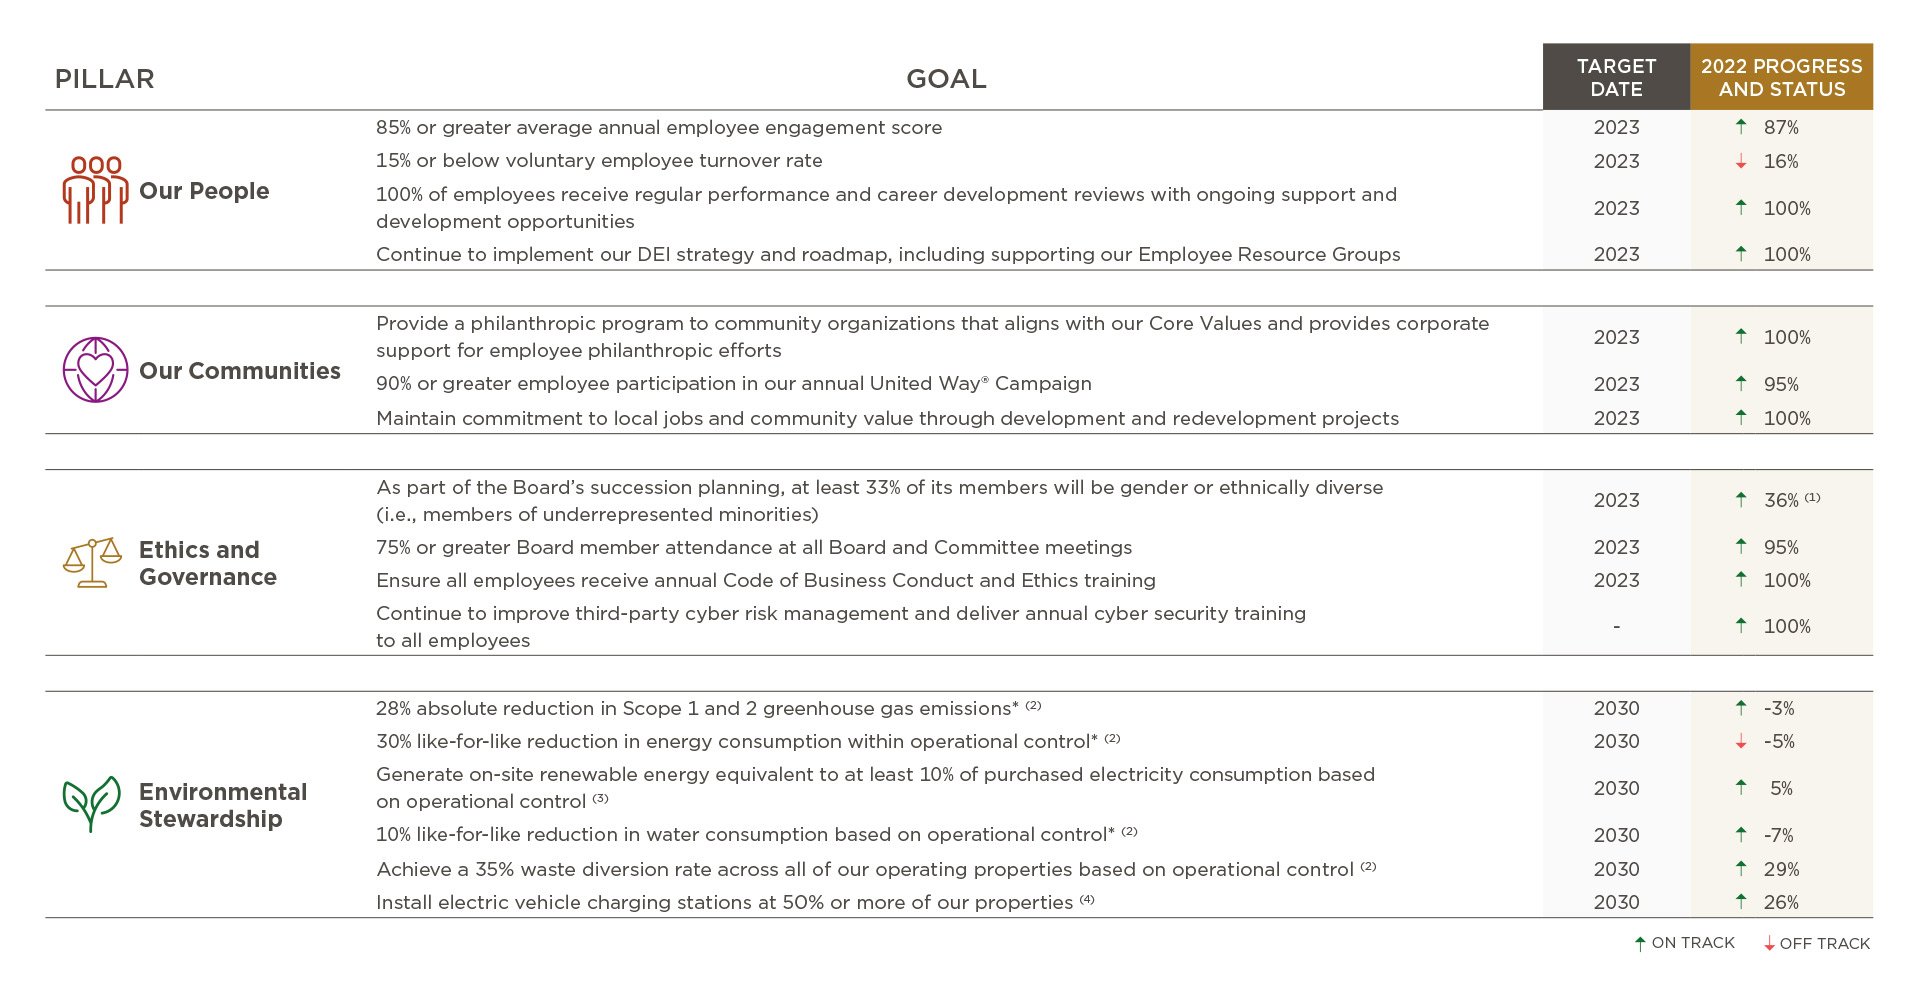 Table of Regency Centers' corporate responsibility goals and progress under our four pillars of: our people, our communities, ethics and governance, envrionmental stewardship.